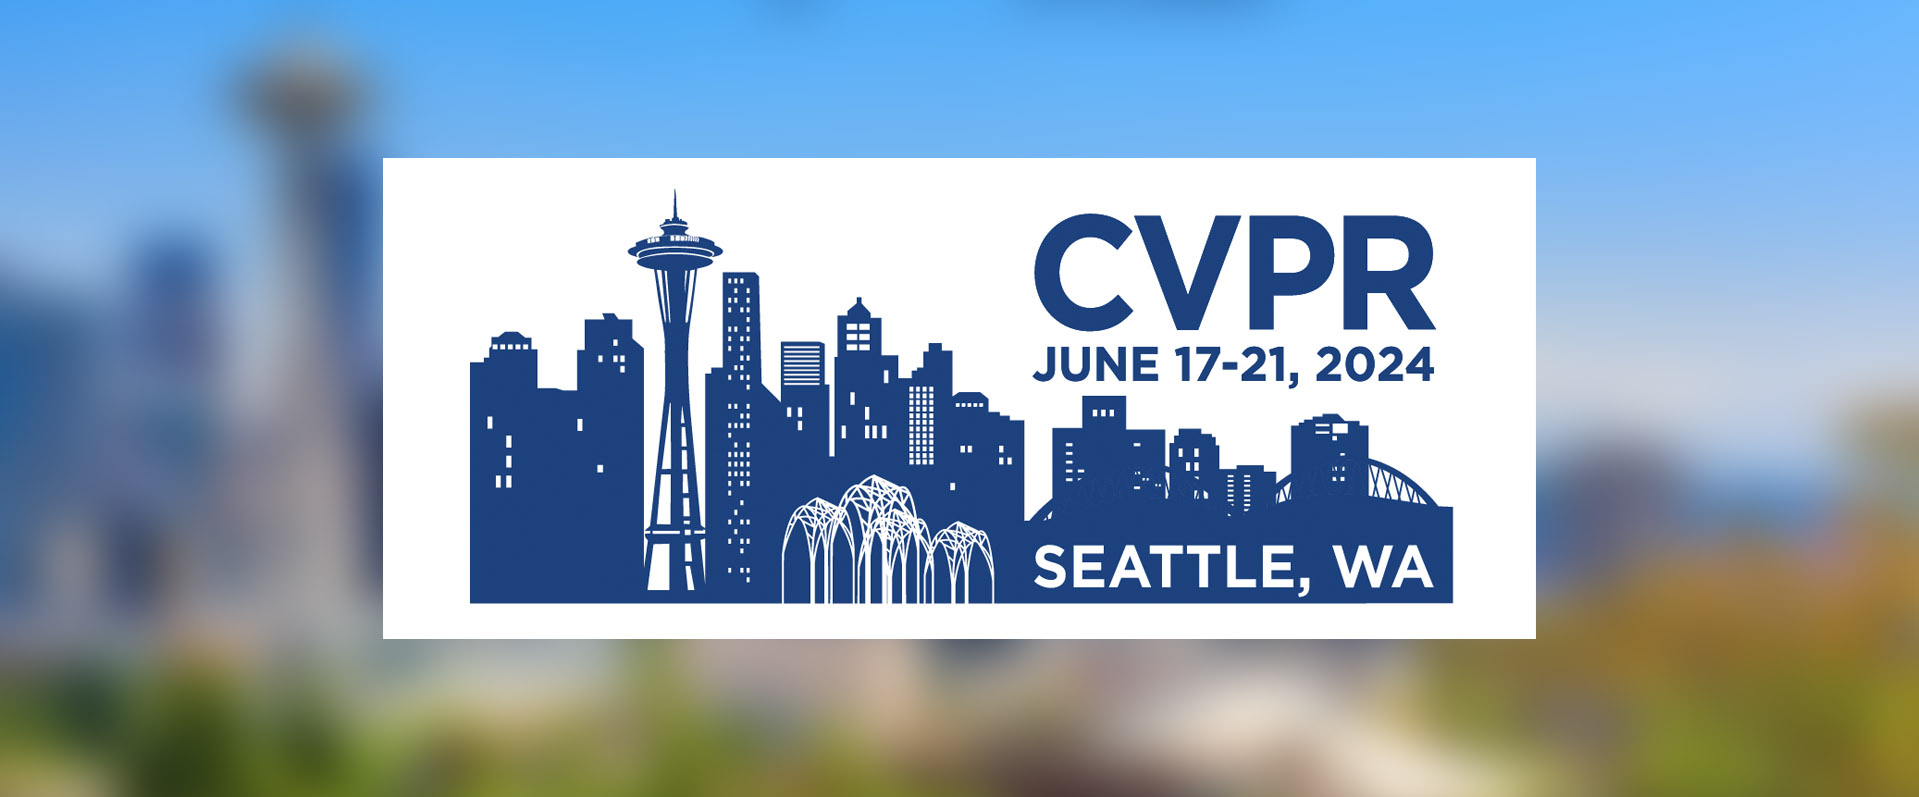 The IEEE/CVPR Conference On Computer Vision And Pattern Recognition